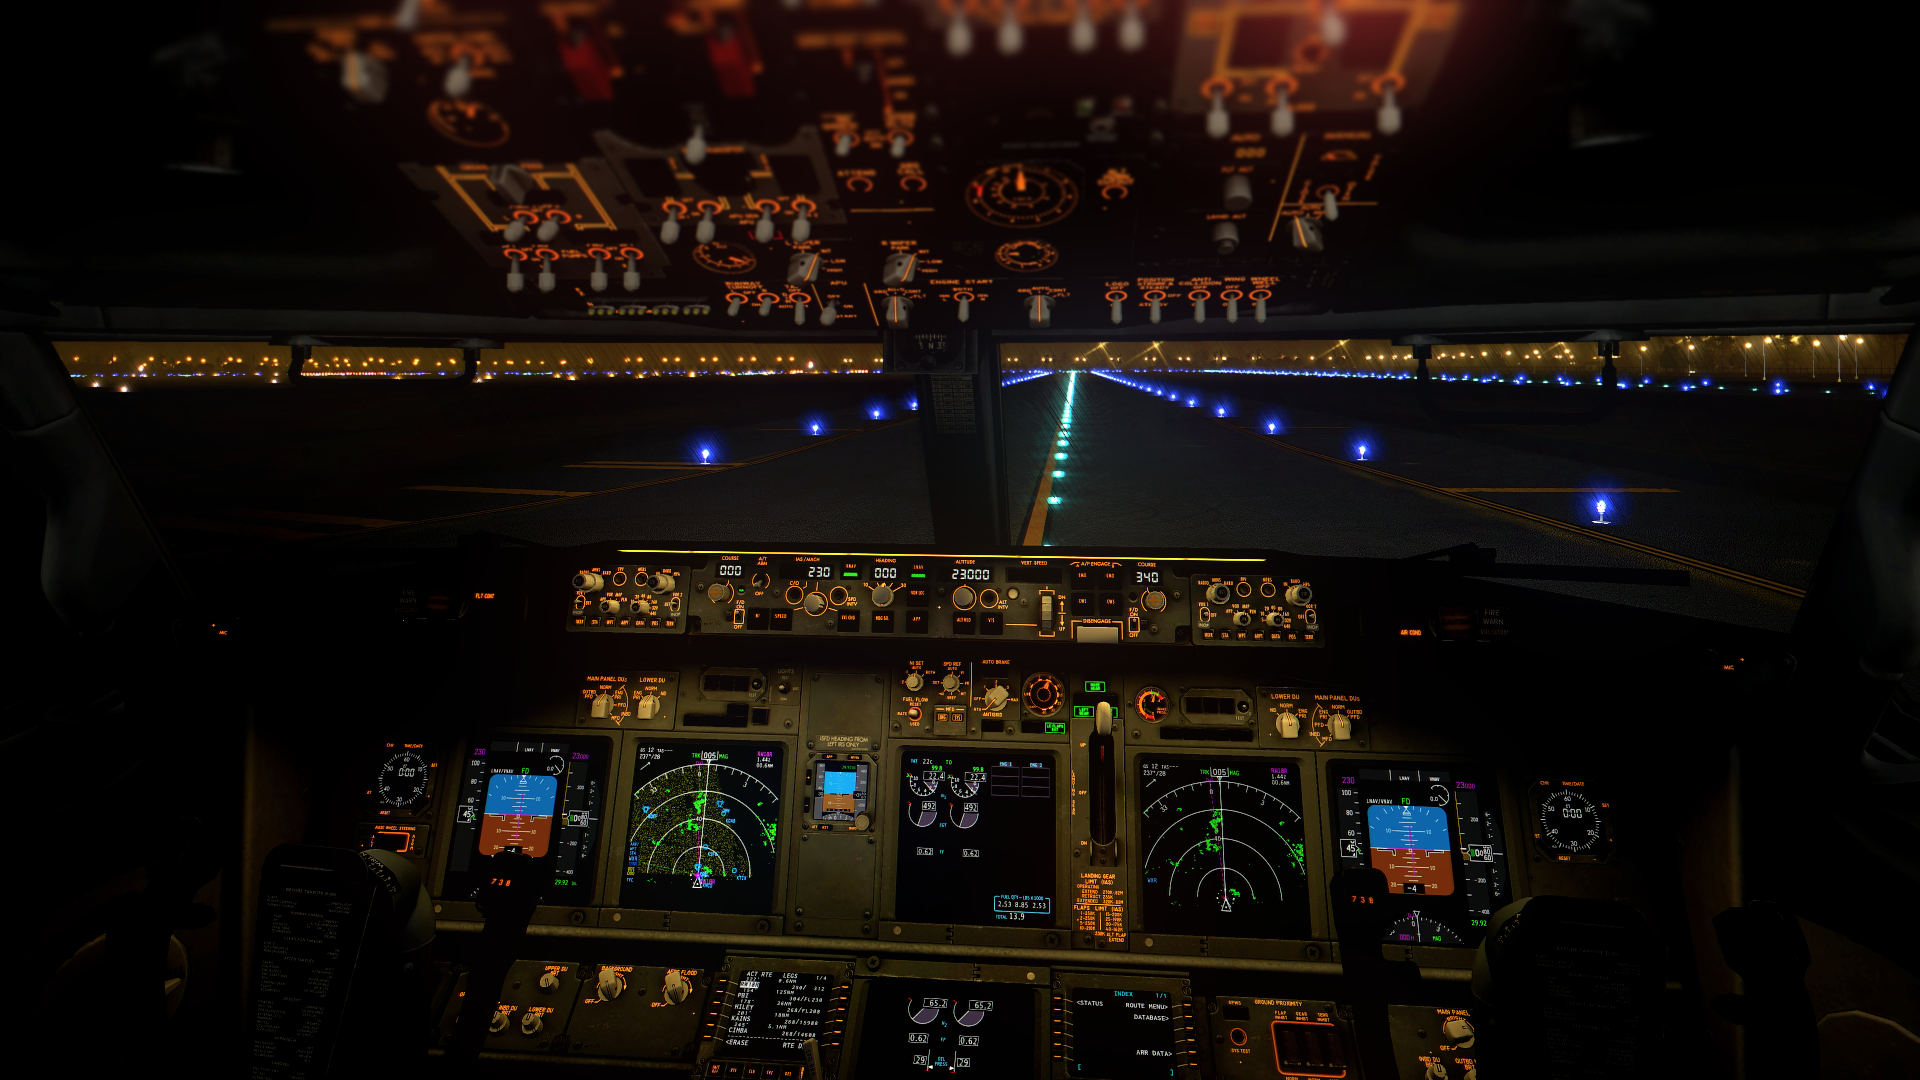 Airline Cockpit At Night Png & Free Airline Cockpit At Night.png Transparent Image